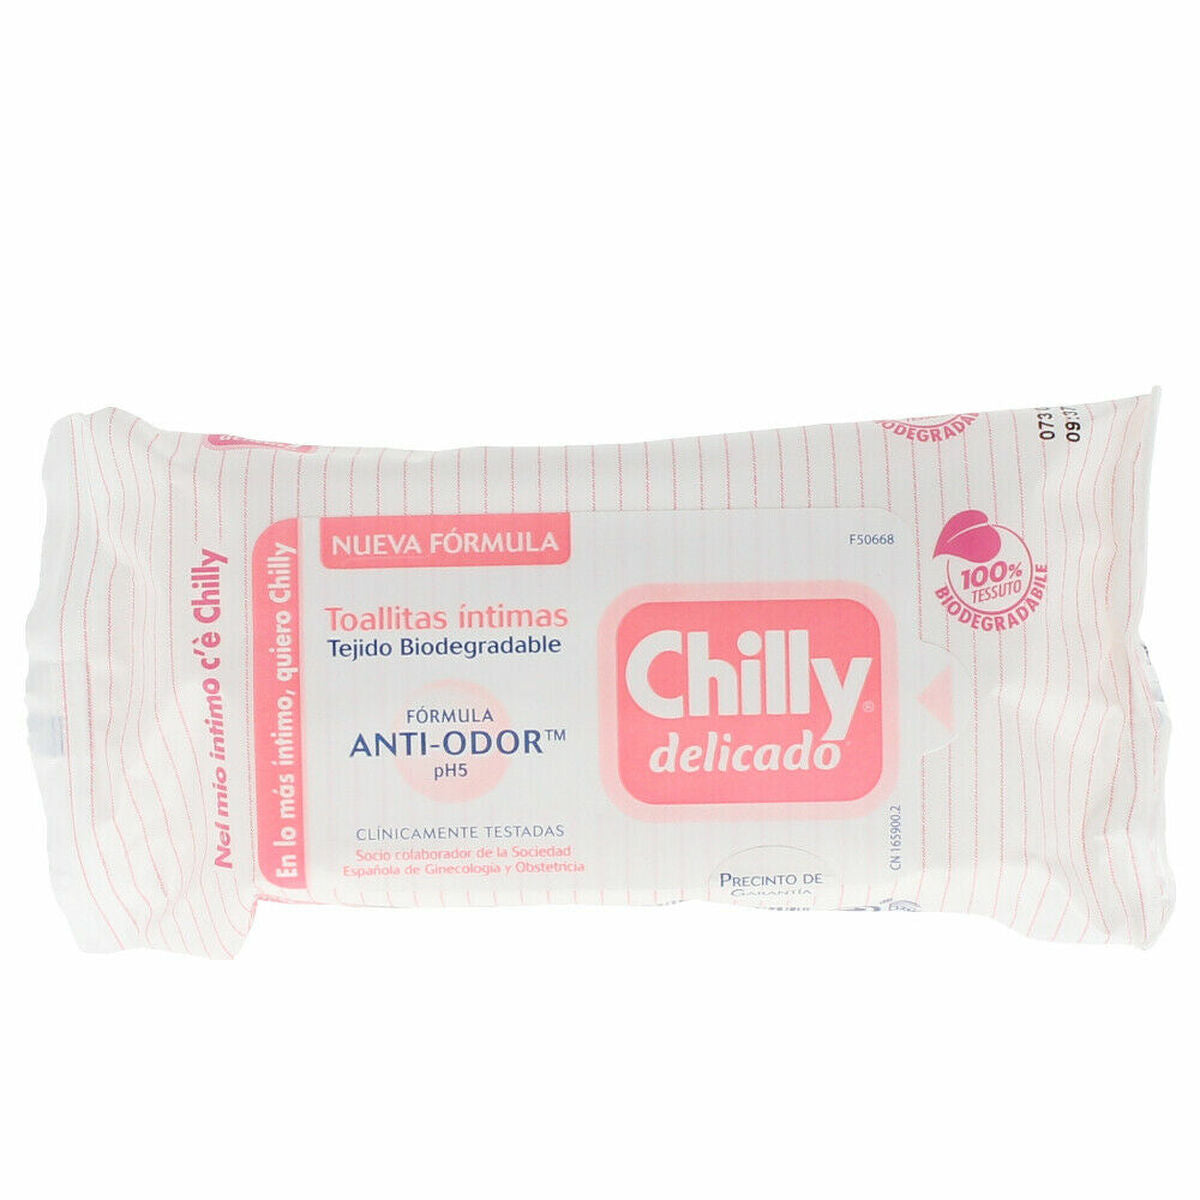 Intimate Hygiene Wip Wipes Chilly Delicado (12 UDS)